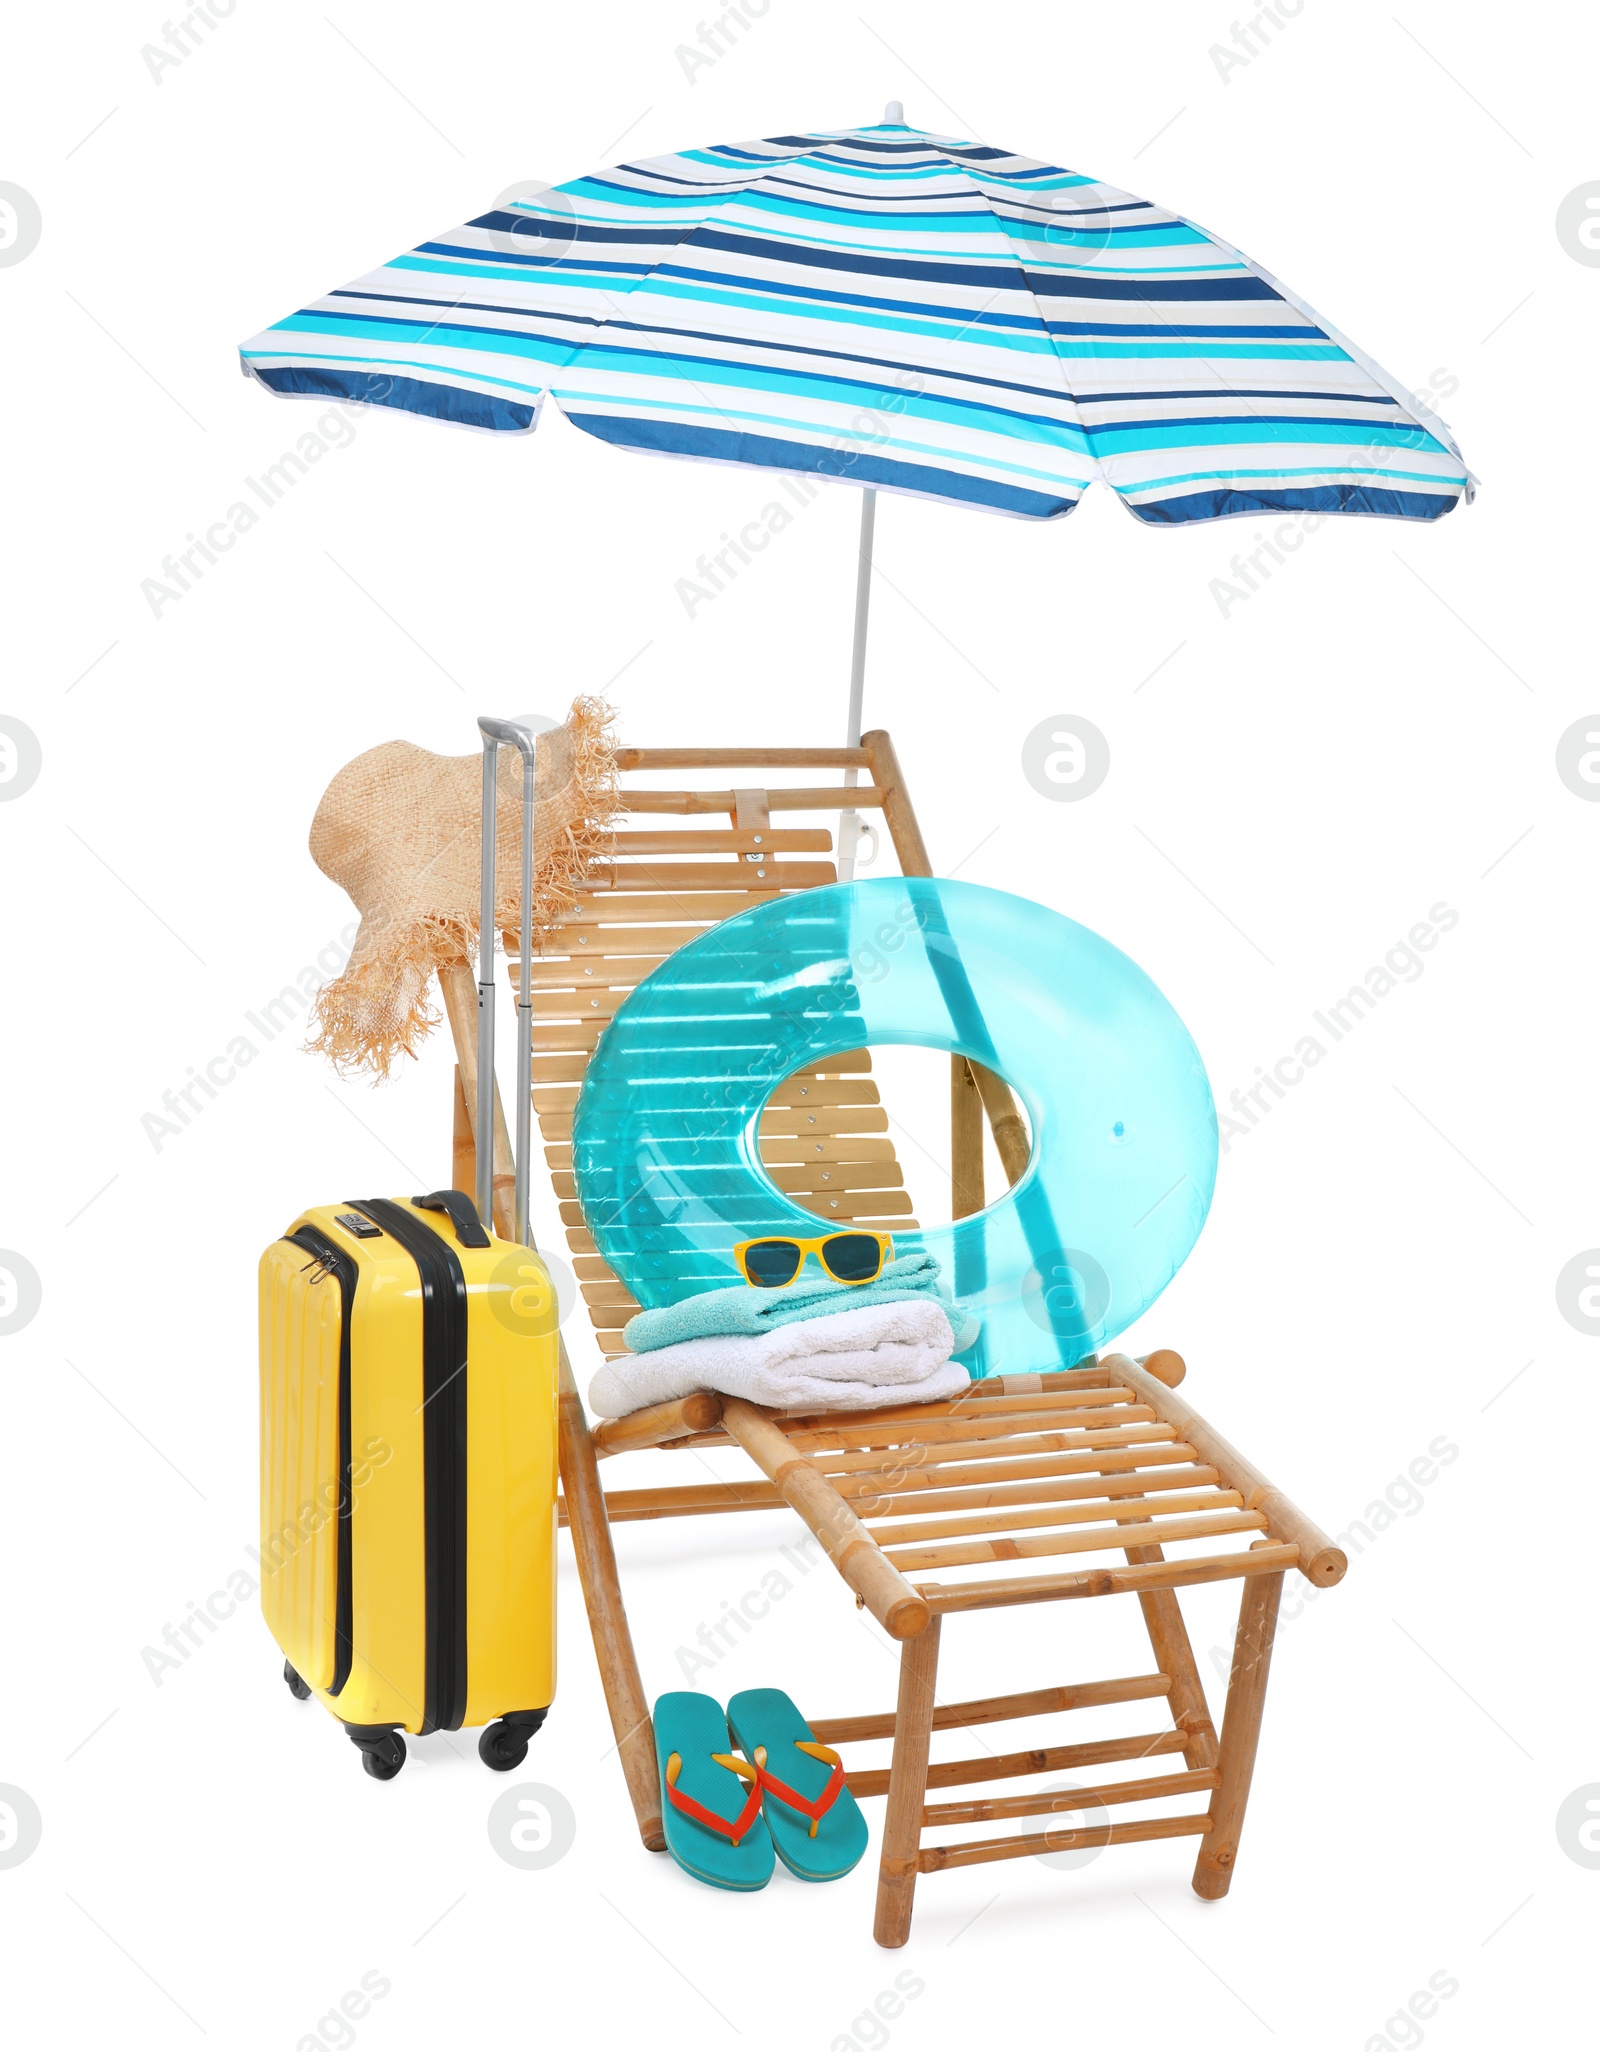 Photo of Deck chair, umbrella, suitcase and beach accessories isolated on white